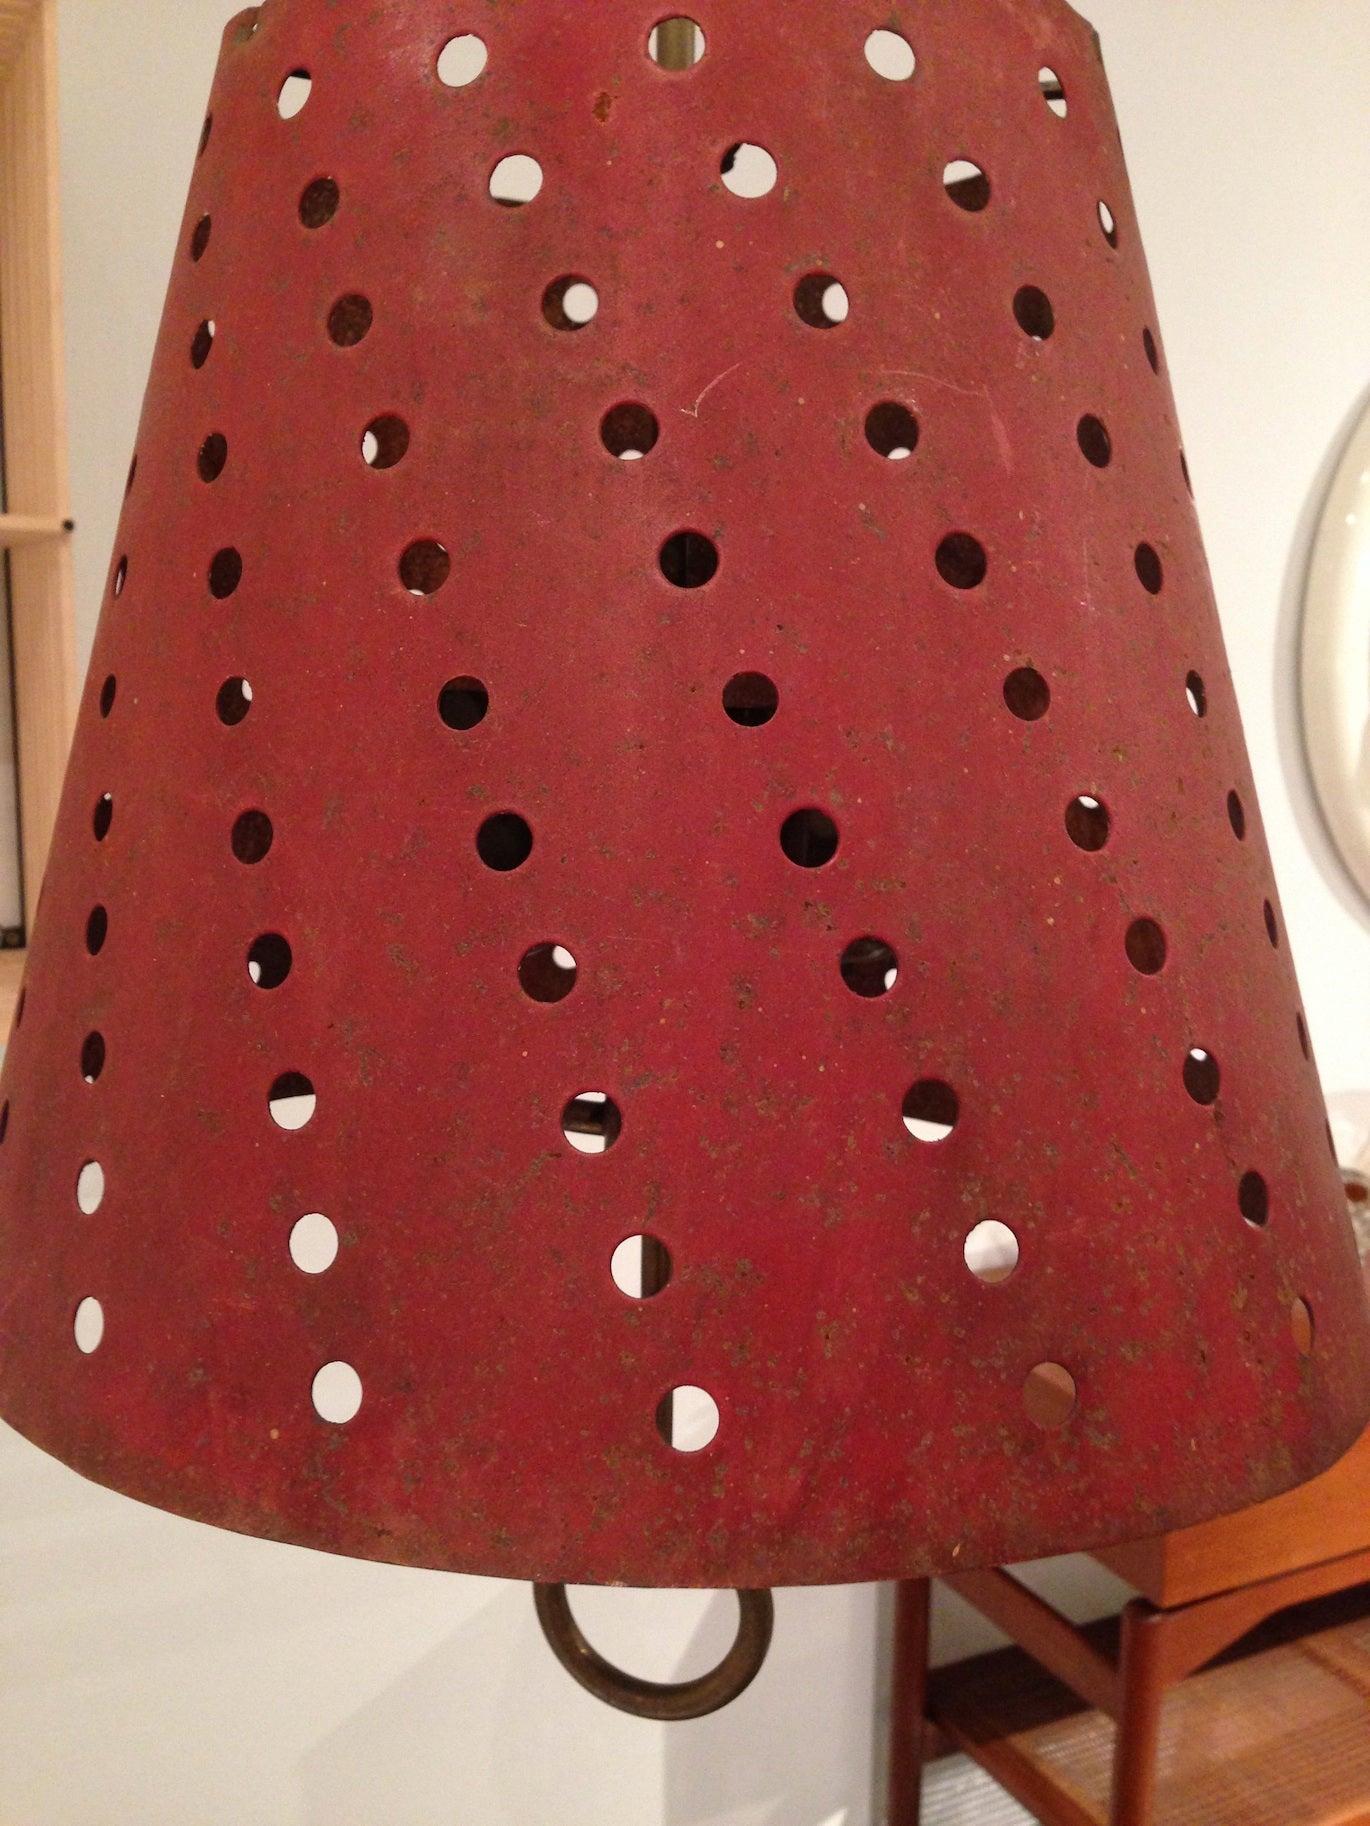 French midcentury hanging lamp in perforated steel shade in original red pain. Brass hanging hardware with ring motif, France, circa 1950s.